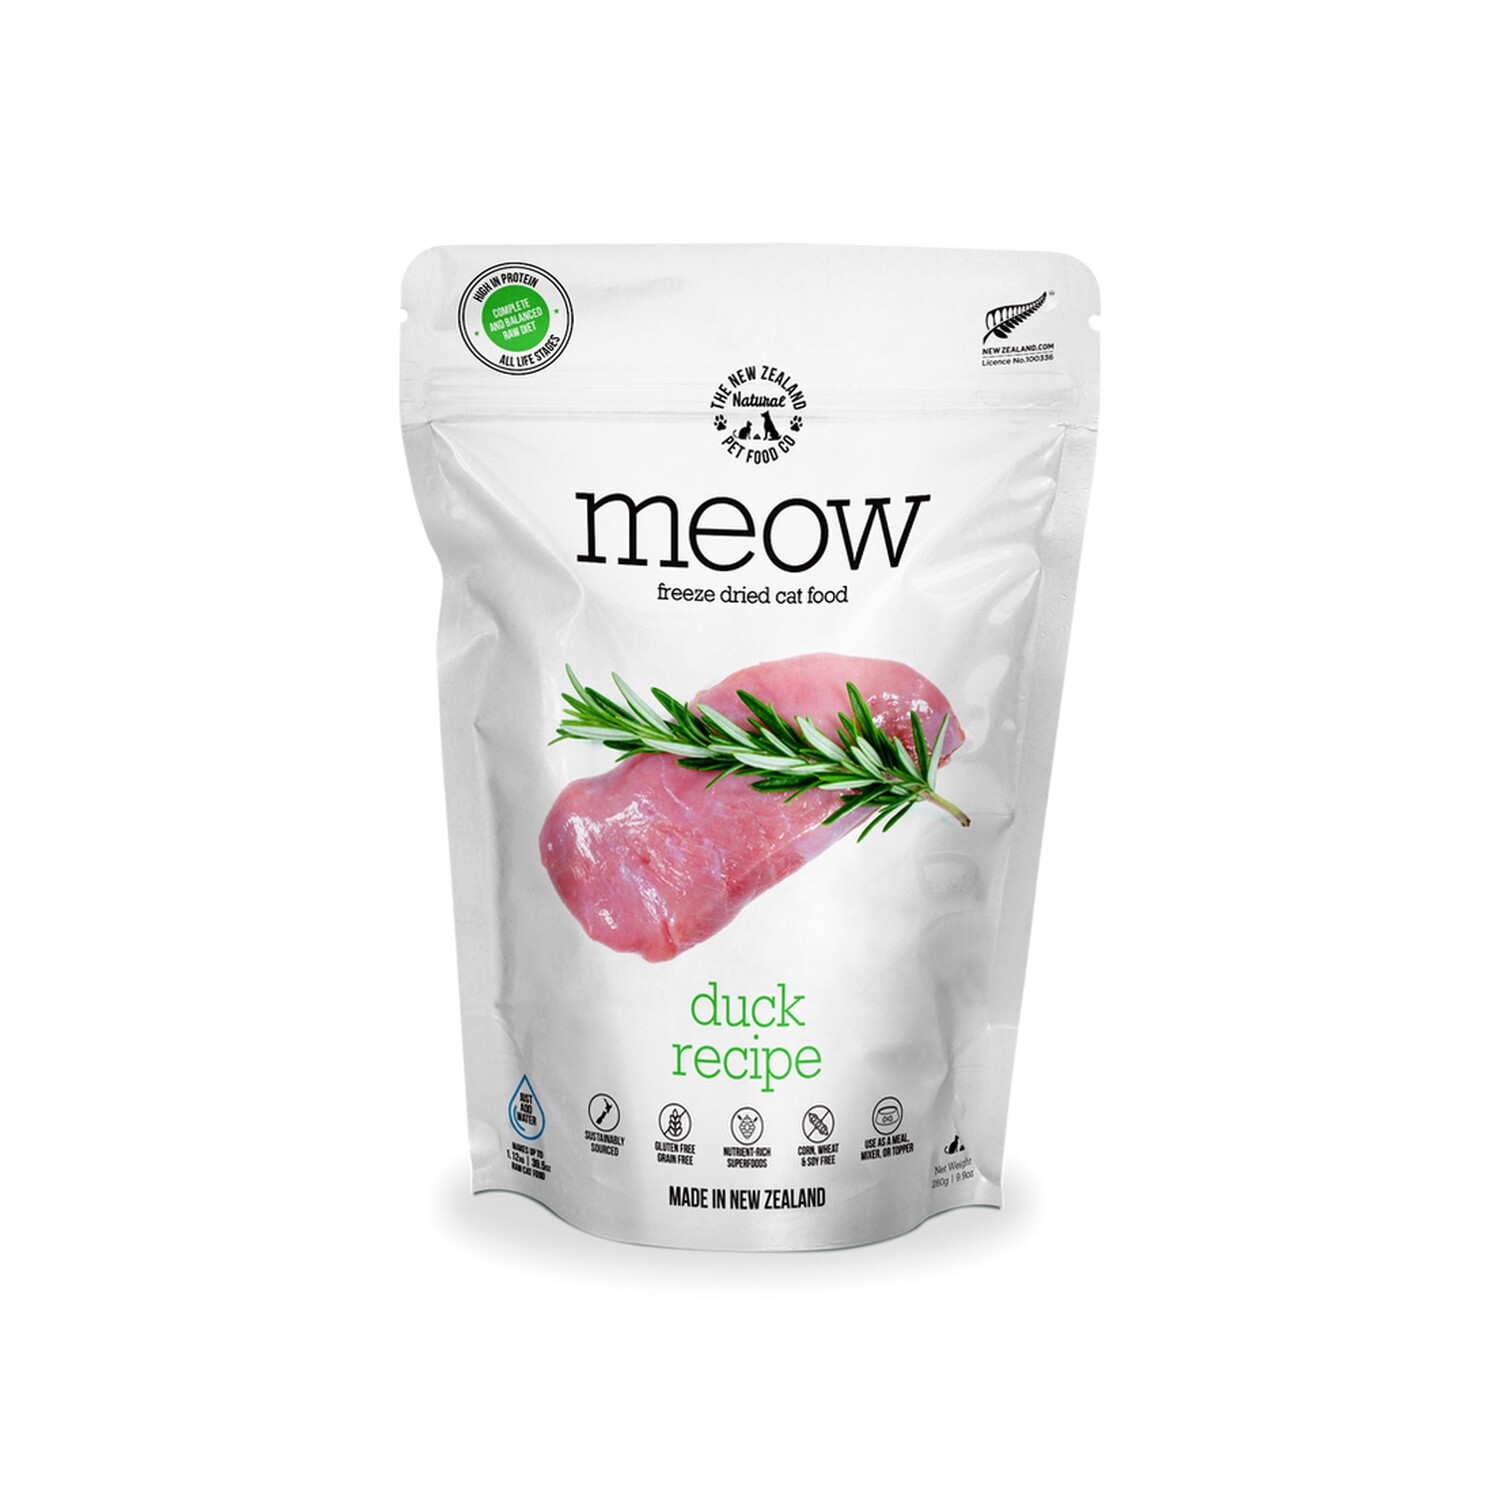 The NZ Natural Meow Freeze-Dried Cat Food - Duck